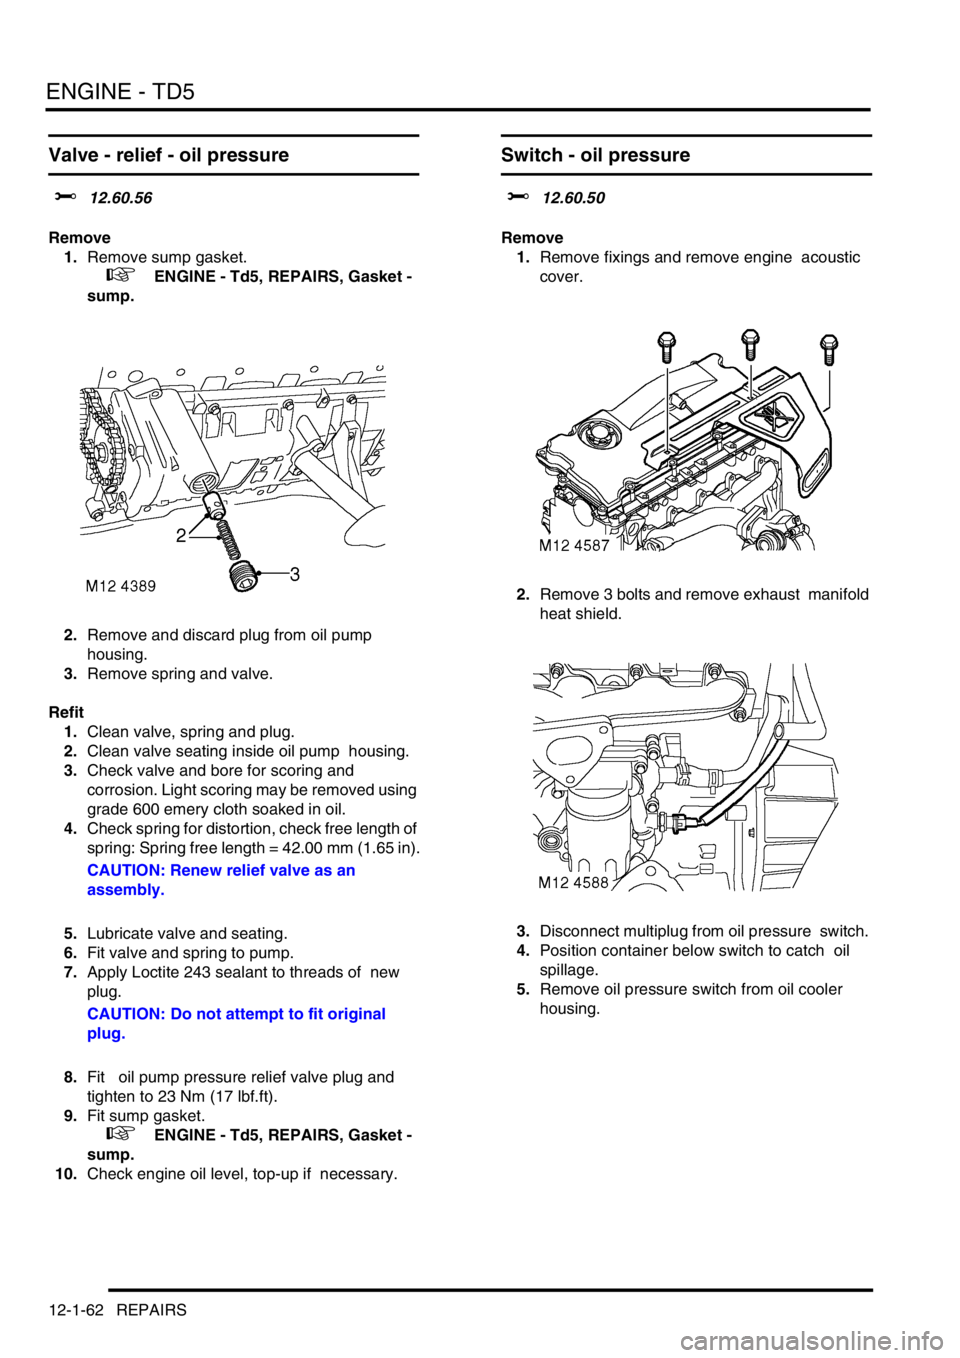 LAND ROVER DISCOVERY 2002  Workshop Manual ENGINE - TD5
12-1-62 REPAIRS
Valve - relief - oil pressure 
$% 12.60.56 
Remove
1.Remove sump gasket. 
 
 +  ENGINE - Td5, REPAIRS, Gasket - 
sump.
2.Remove and discard plug from oil pump 
housing. 
3